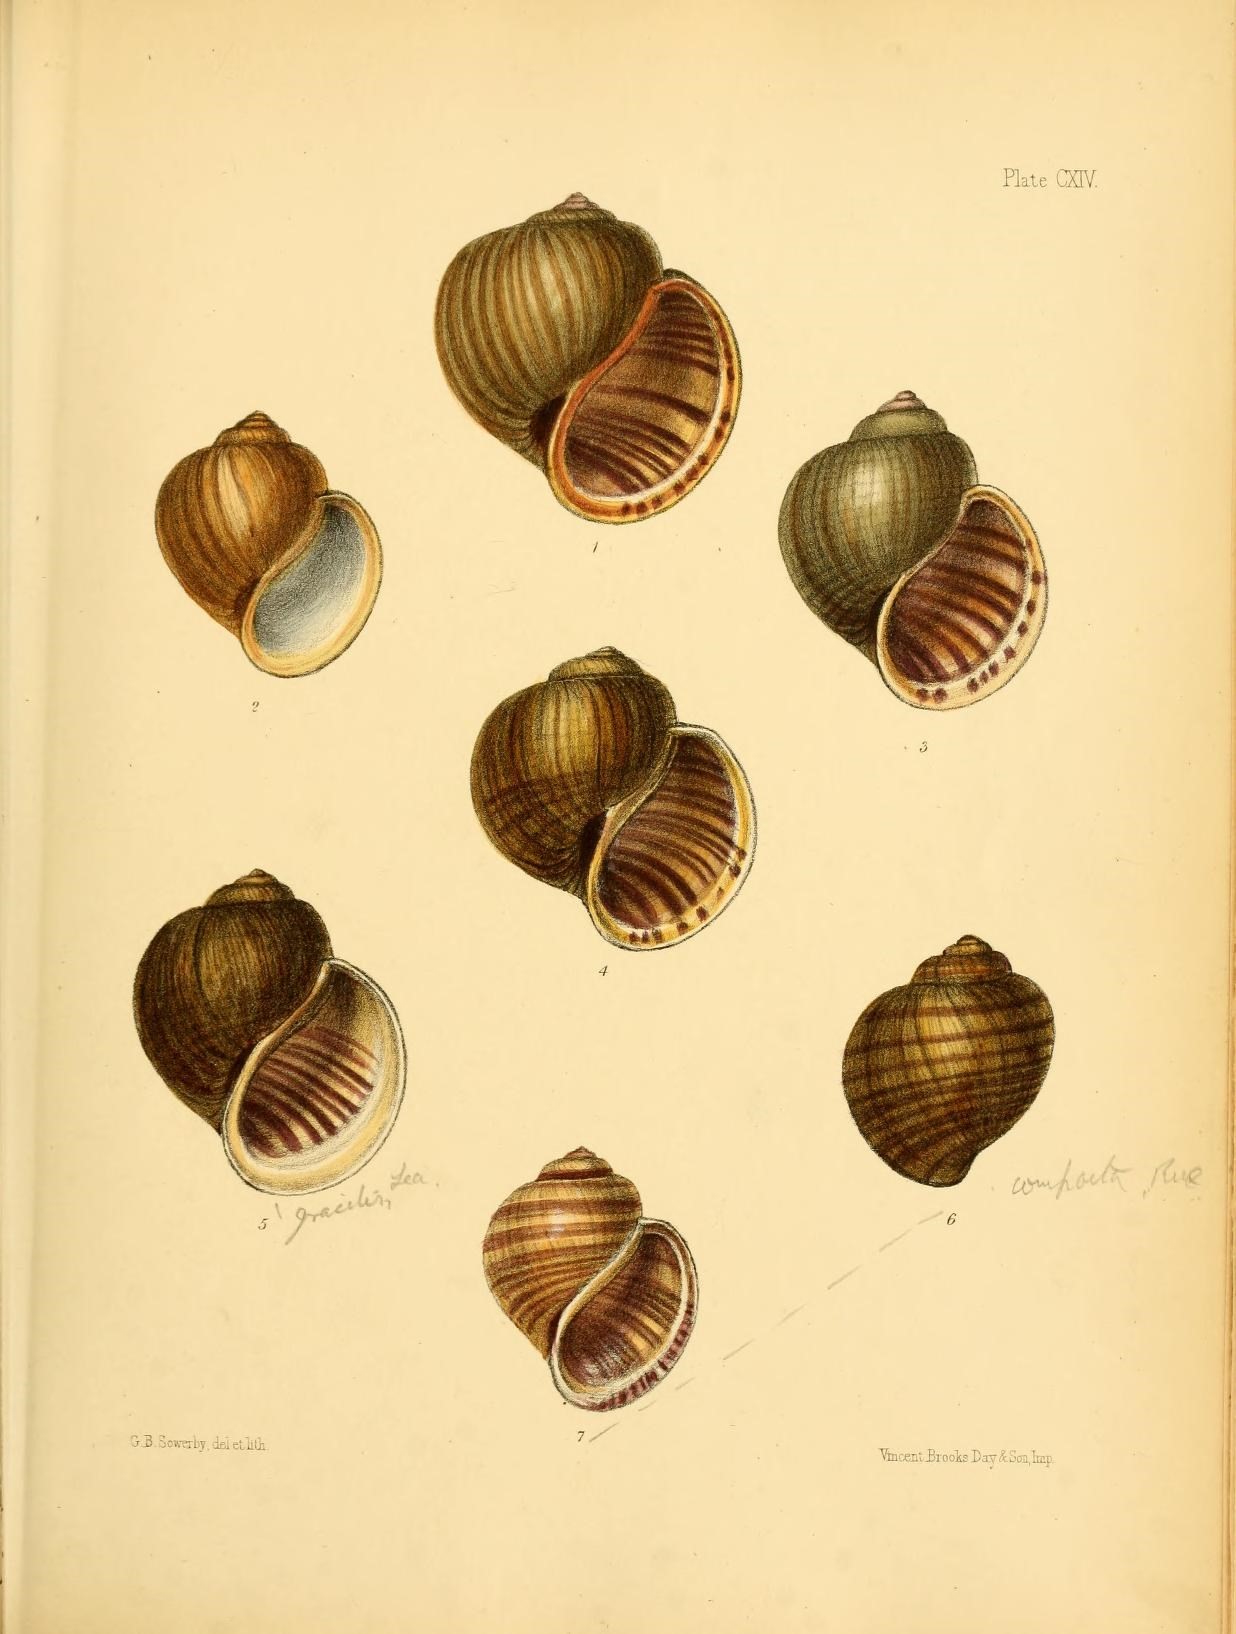 a group of seashells are shown in color